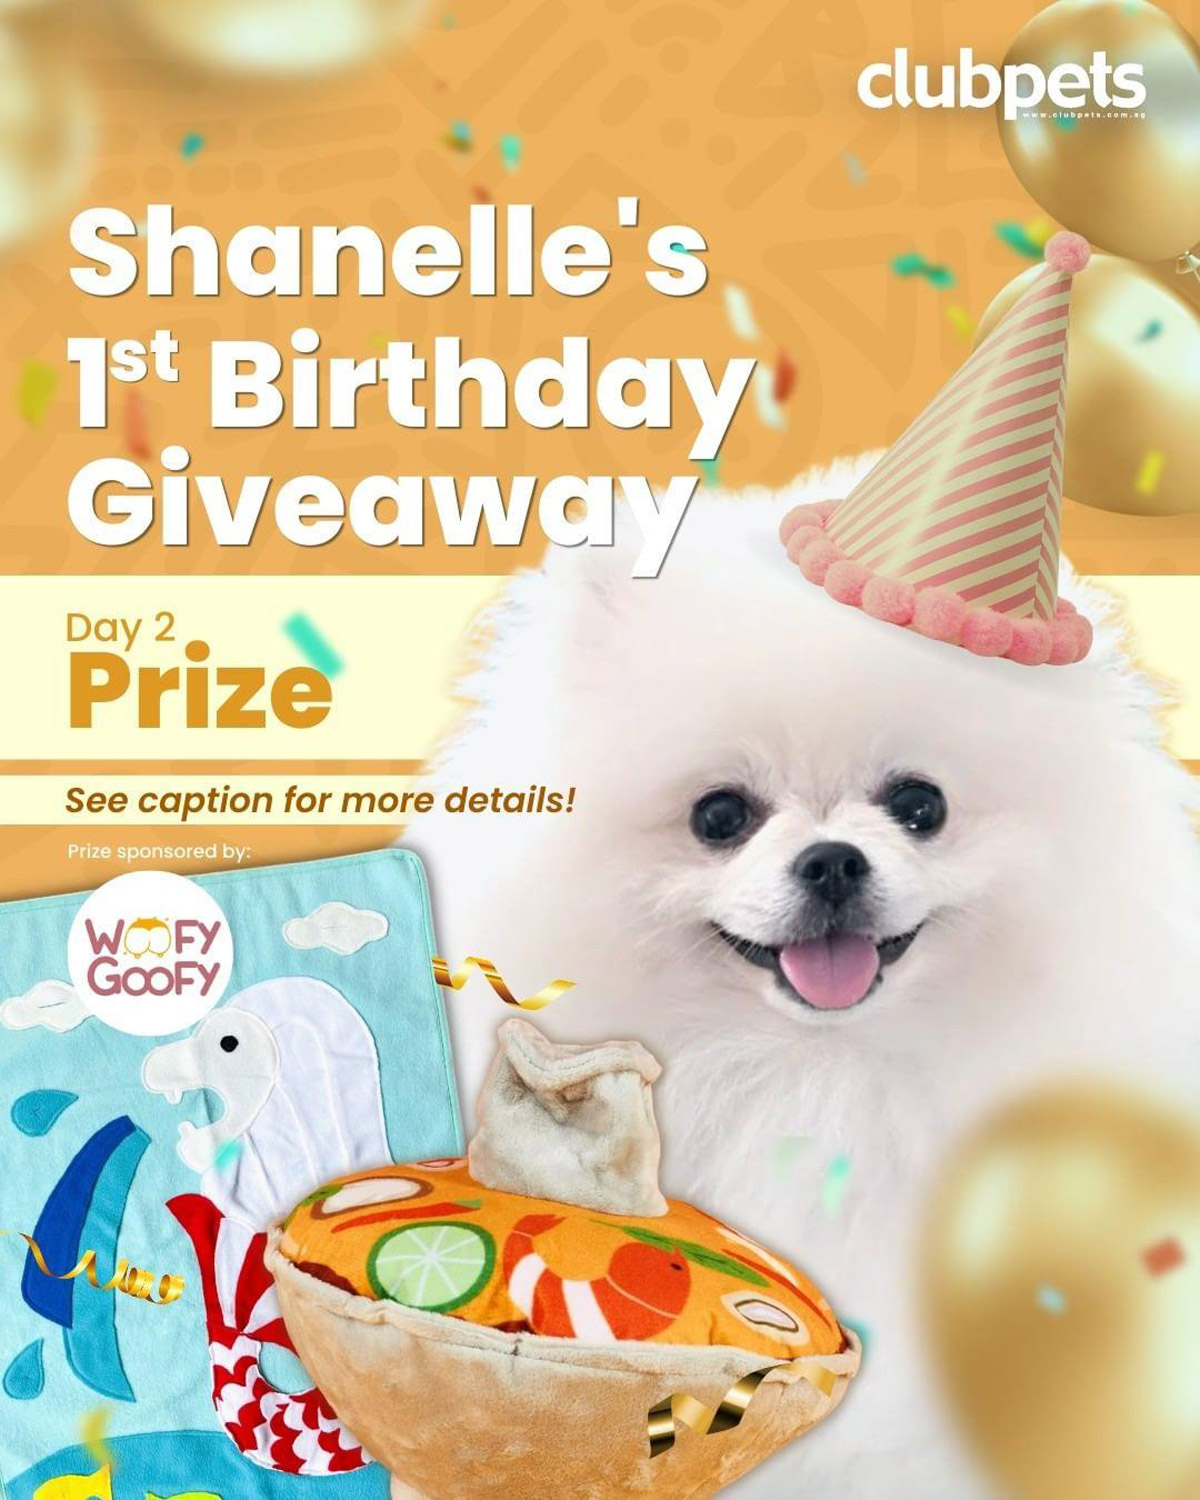 Shanelle’s 1st Birthday Bash: Relive the Best Moments with Clubpets